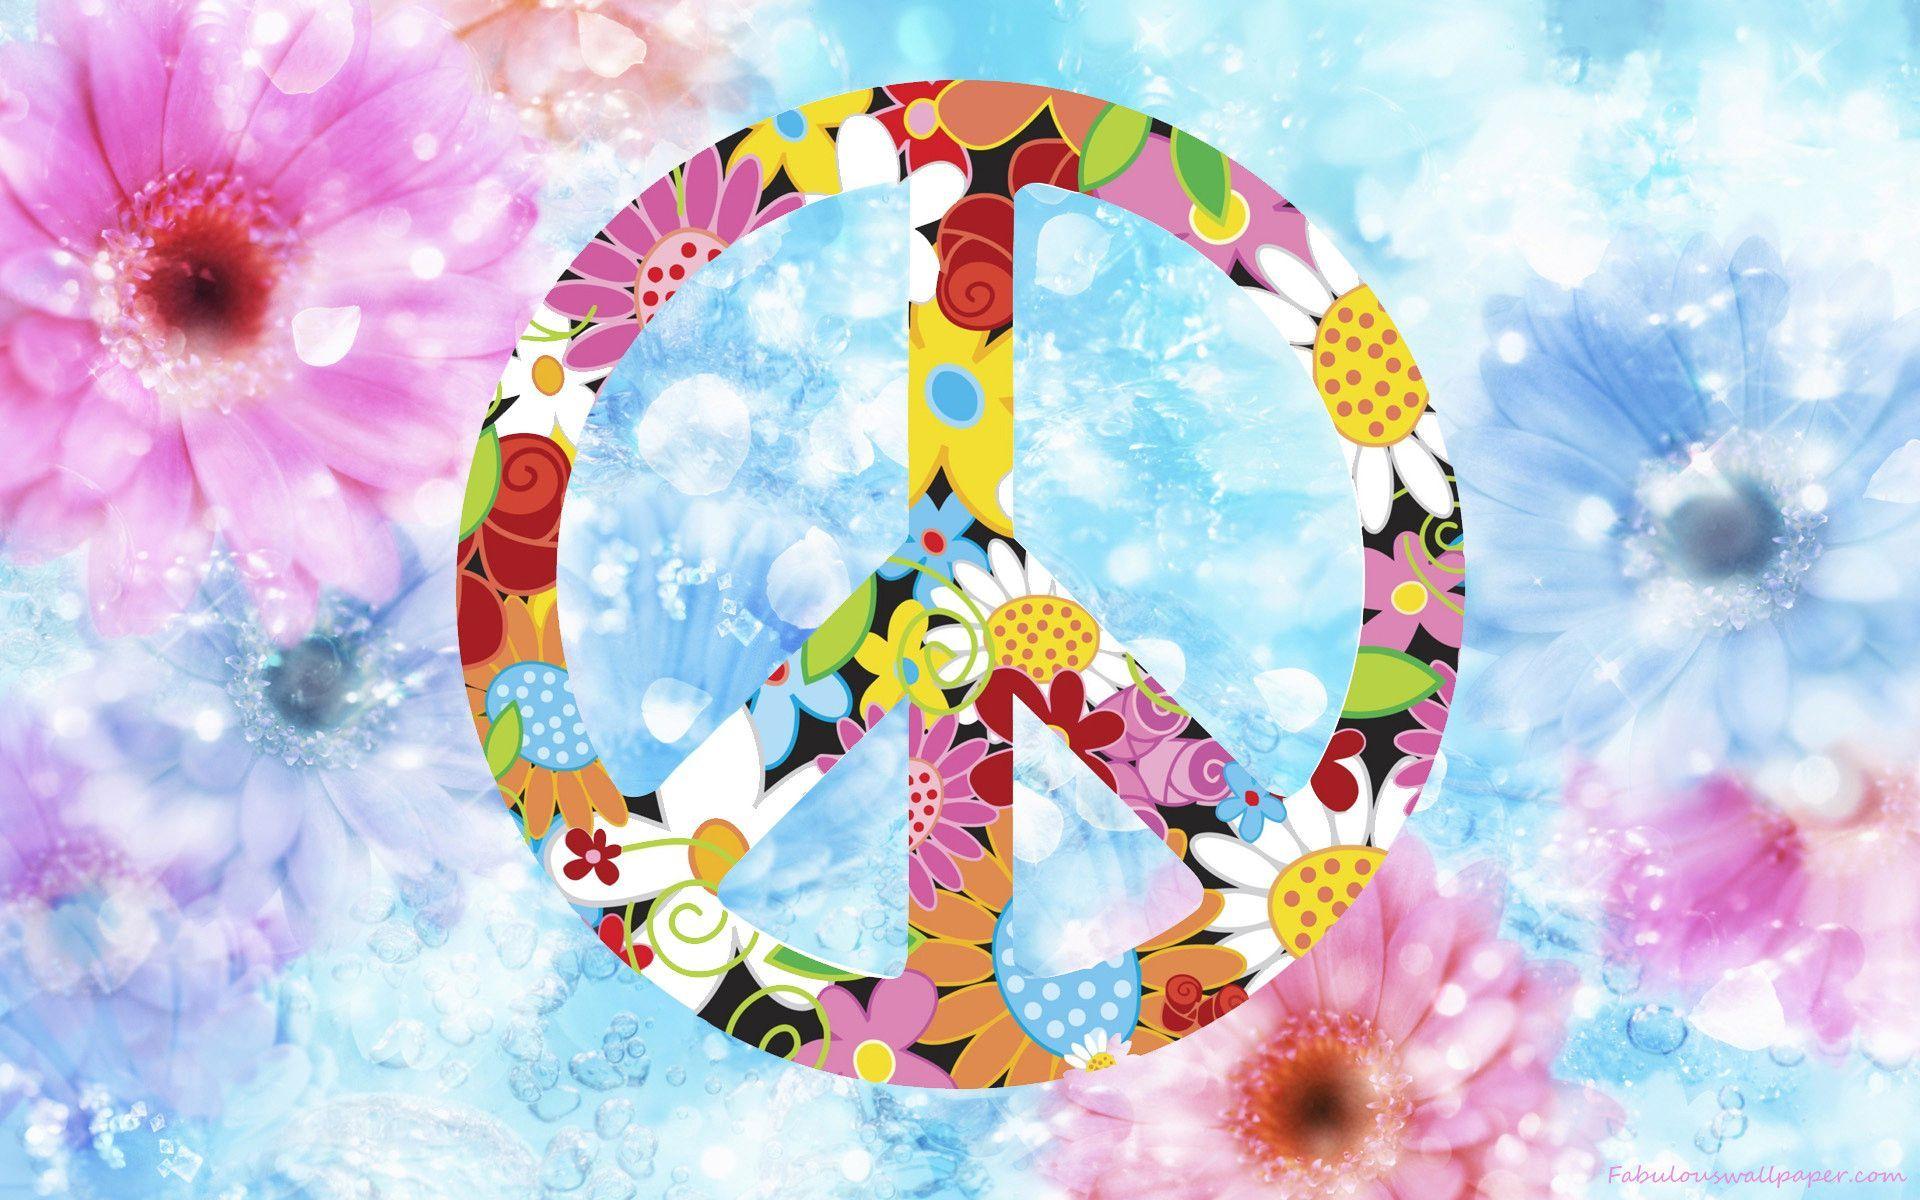 All Free Background of Peace Wallpaper. Best Free Wallpaper